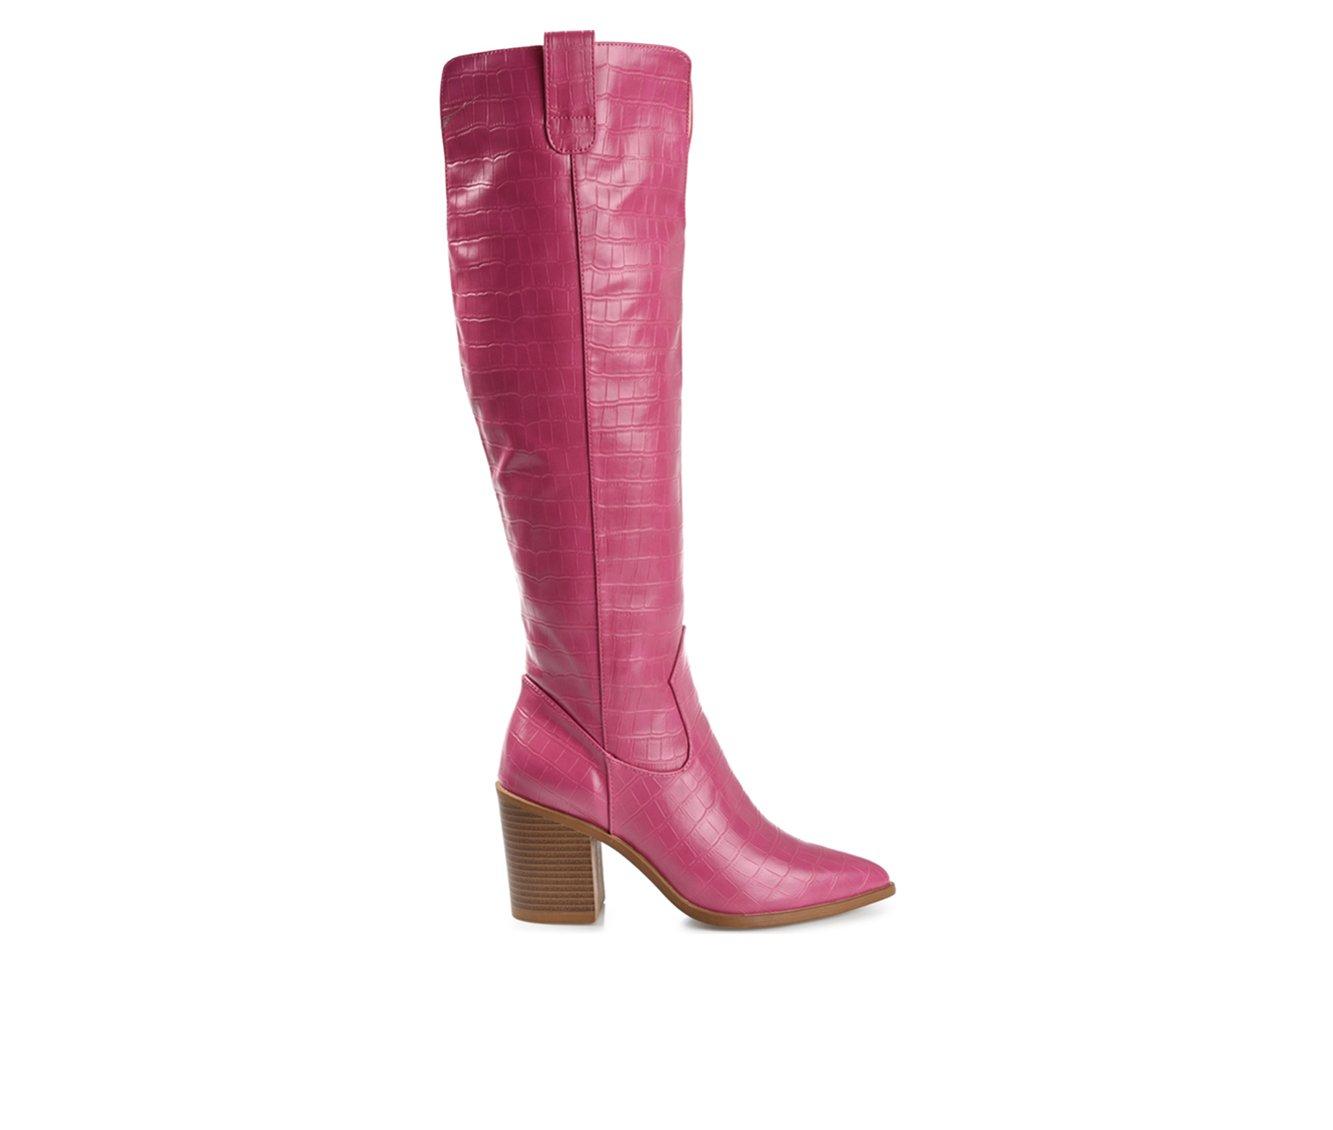 Women's Journee Collection Therese Over-The-Knee Boots